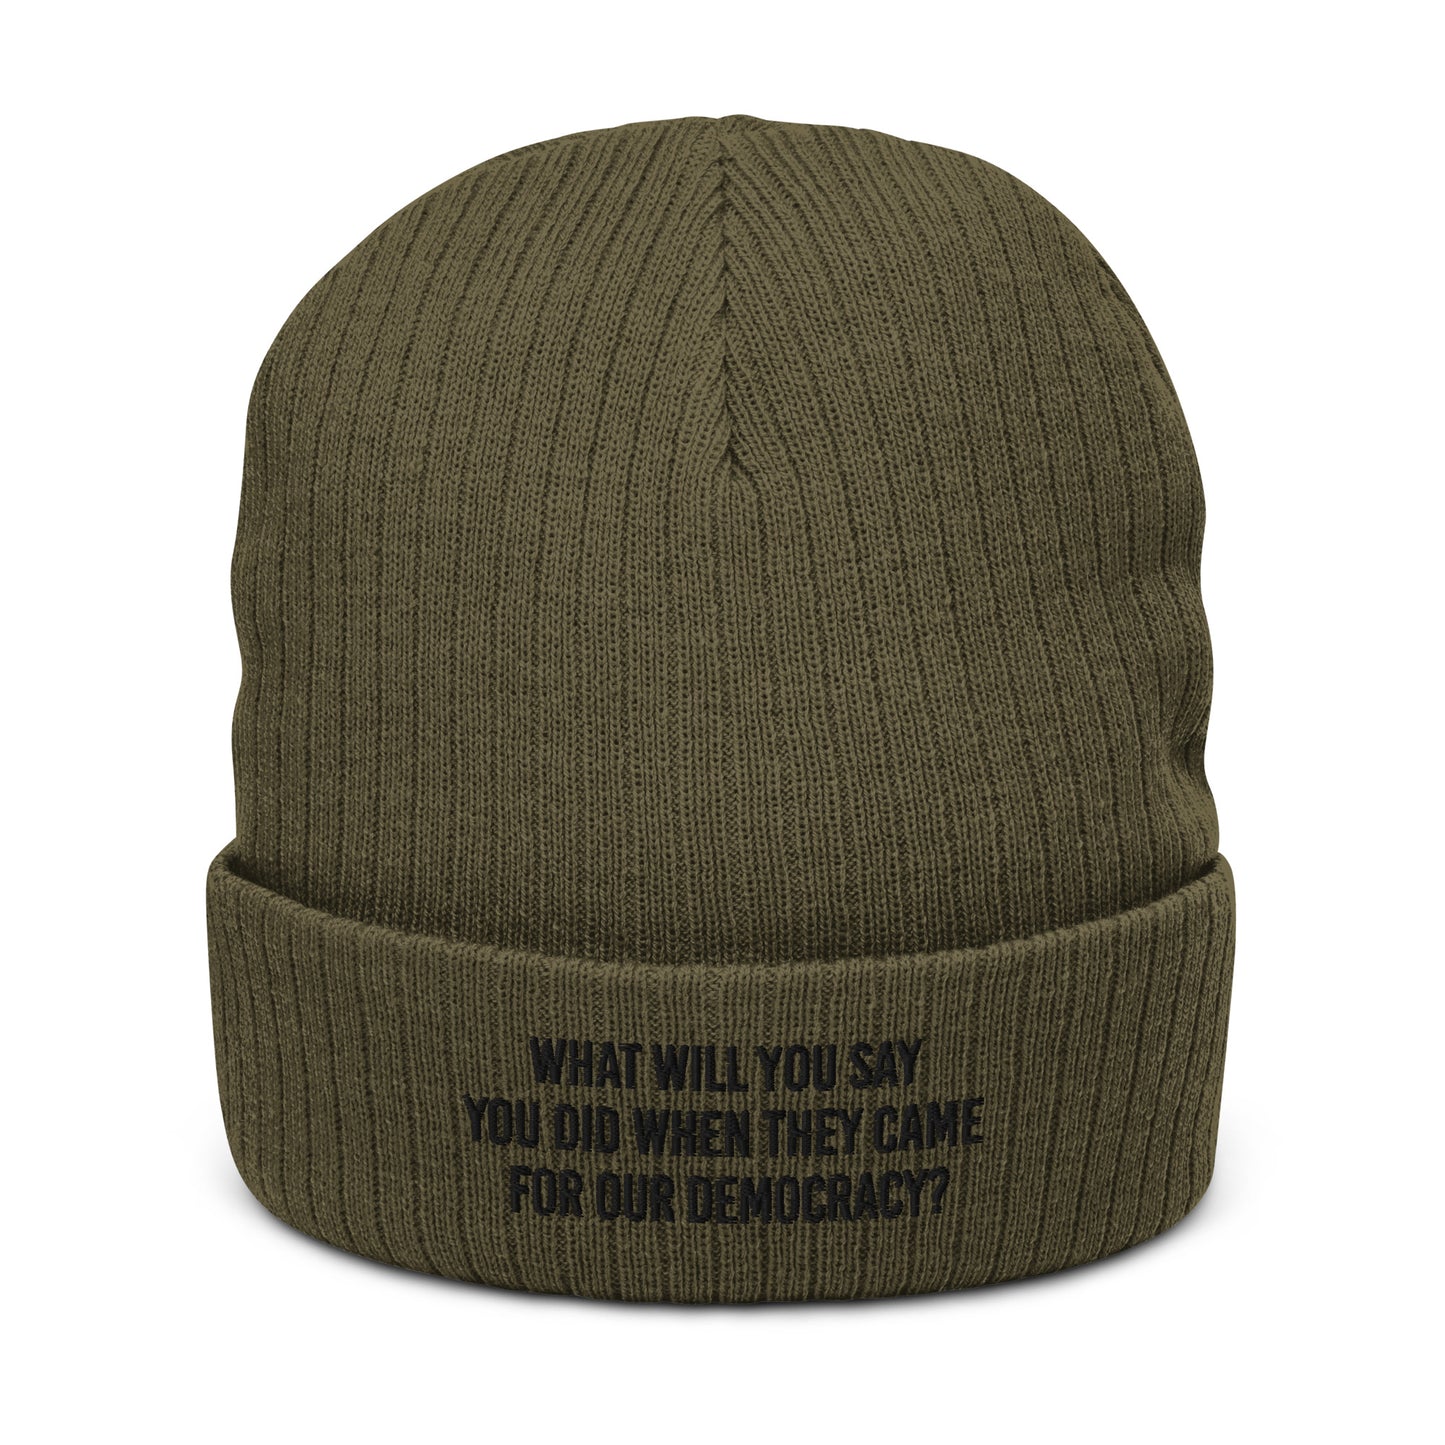 What Will You Say - Ribbed Knit Beanie